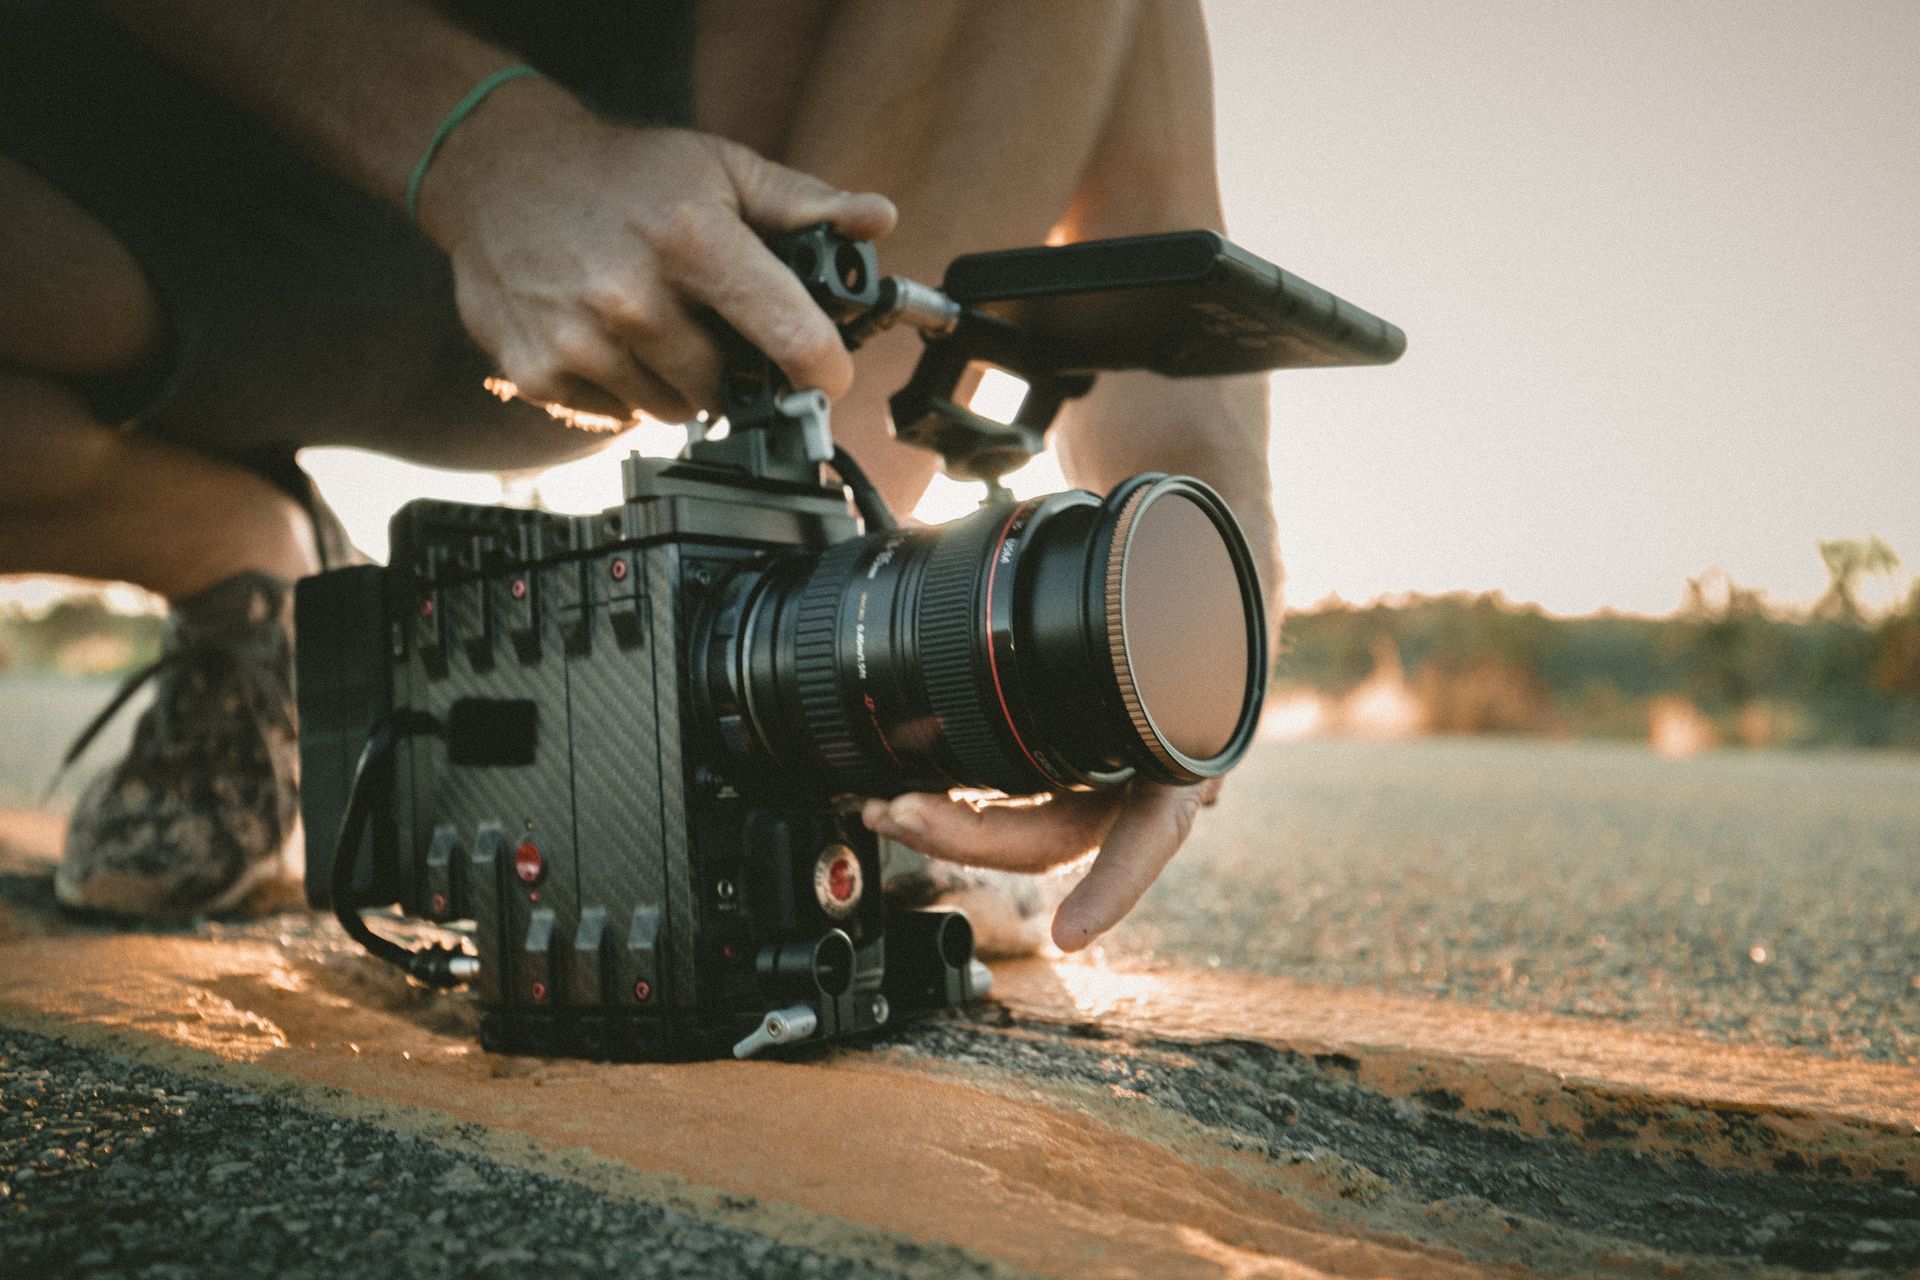 Handheld low angle of a camera operator holding a RED cinema camera